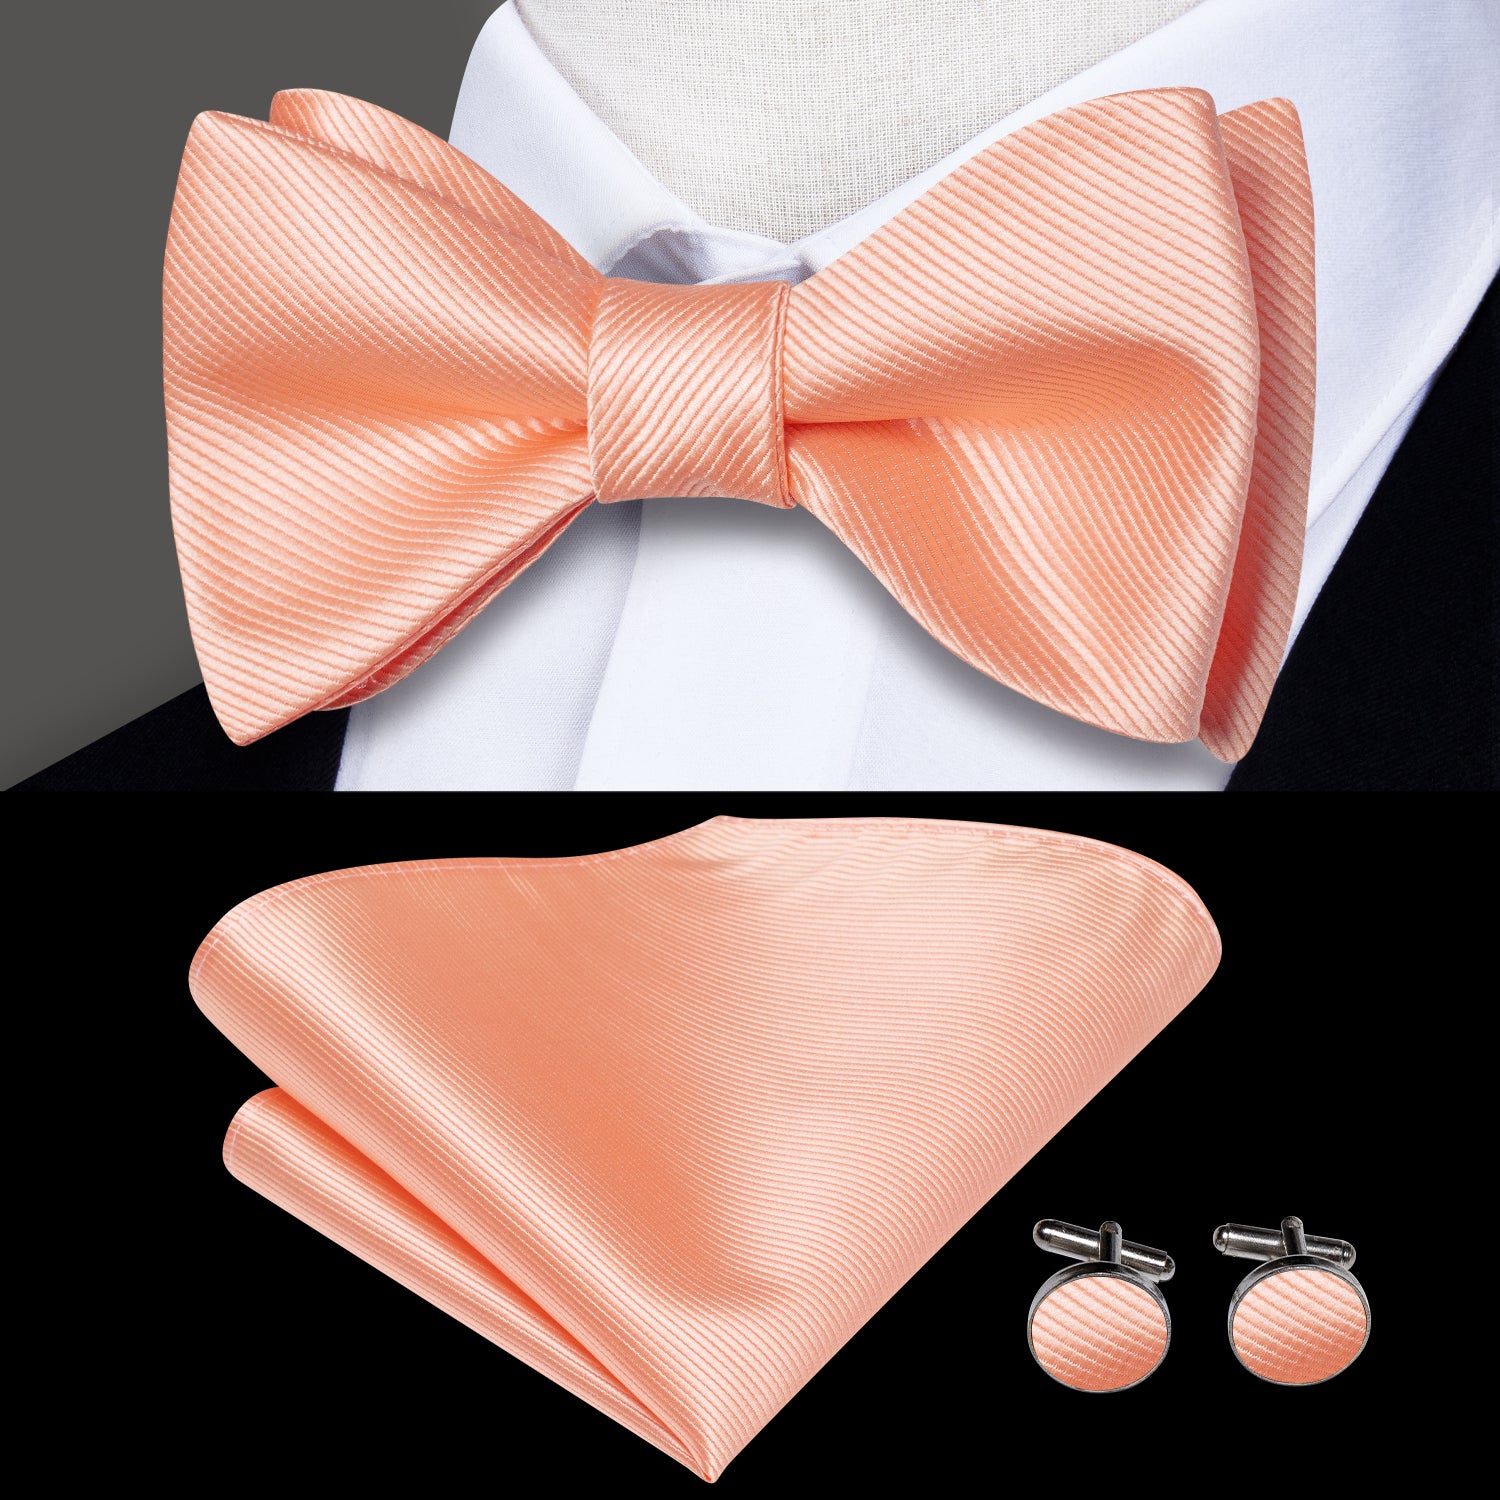 Coral Pink Striped Silk Self-tied Bow Tie Pocket Square Cufflinks Set